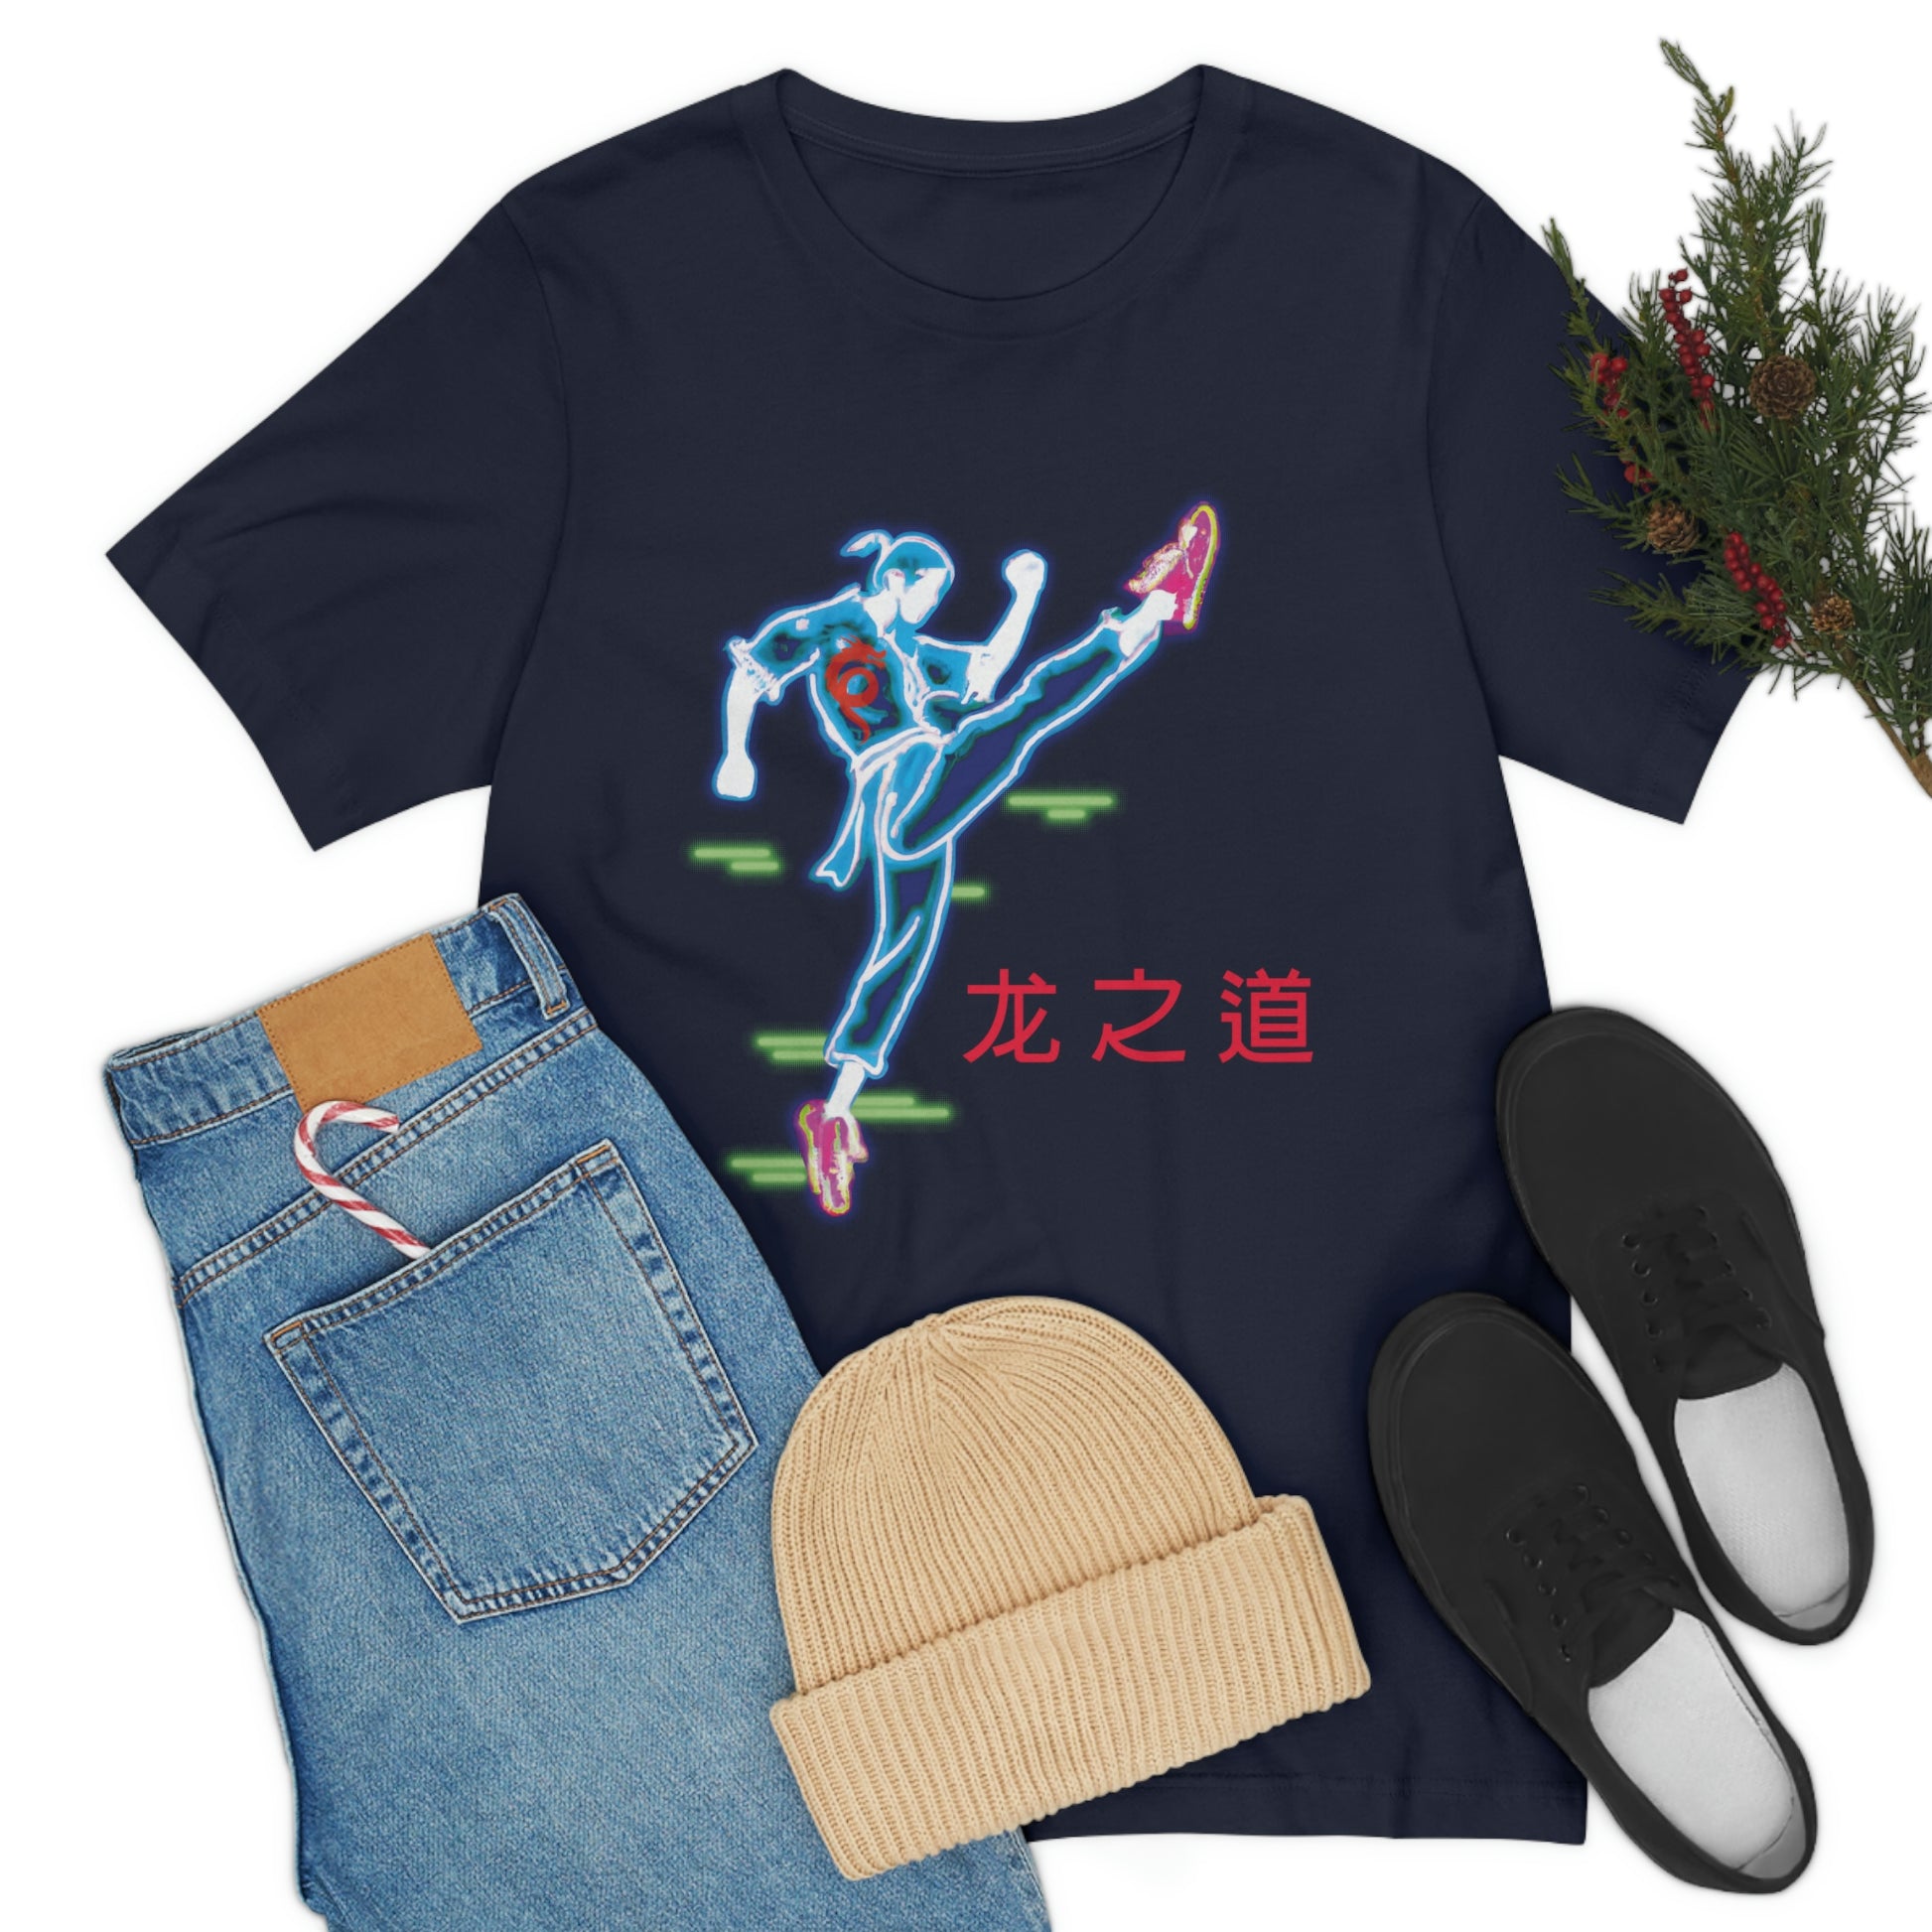 Navy T-Shirt featuring a neon-esque martial arts fighter with red Cantonese text stating 'Way of the Dragon' from the TEQNEON Neolific collection, called CYBERFU